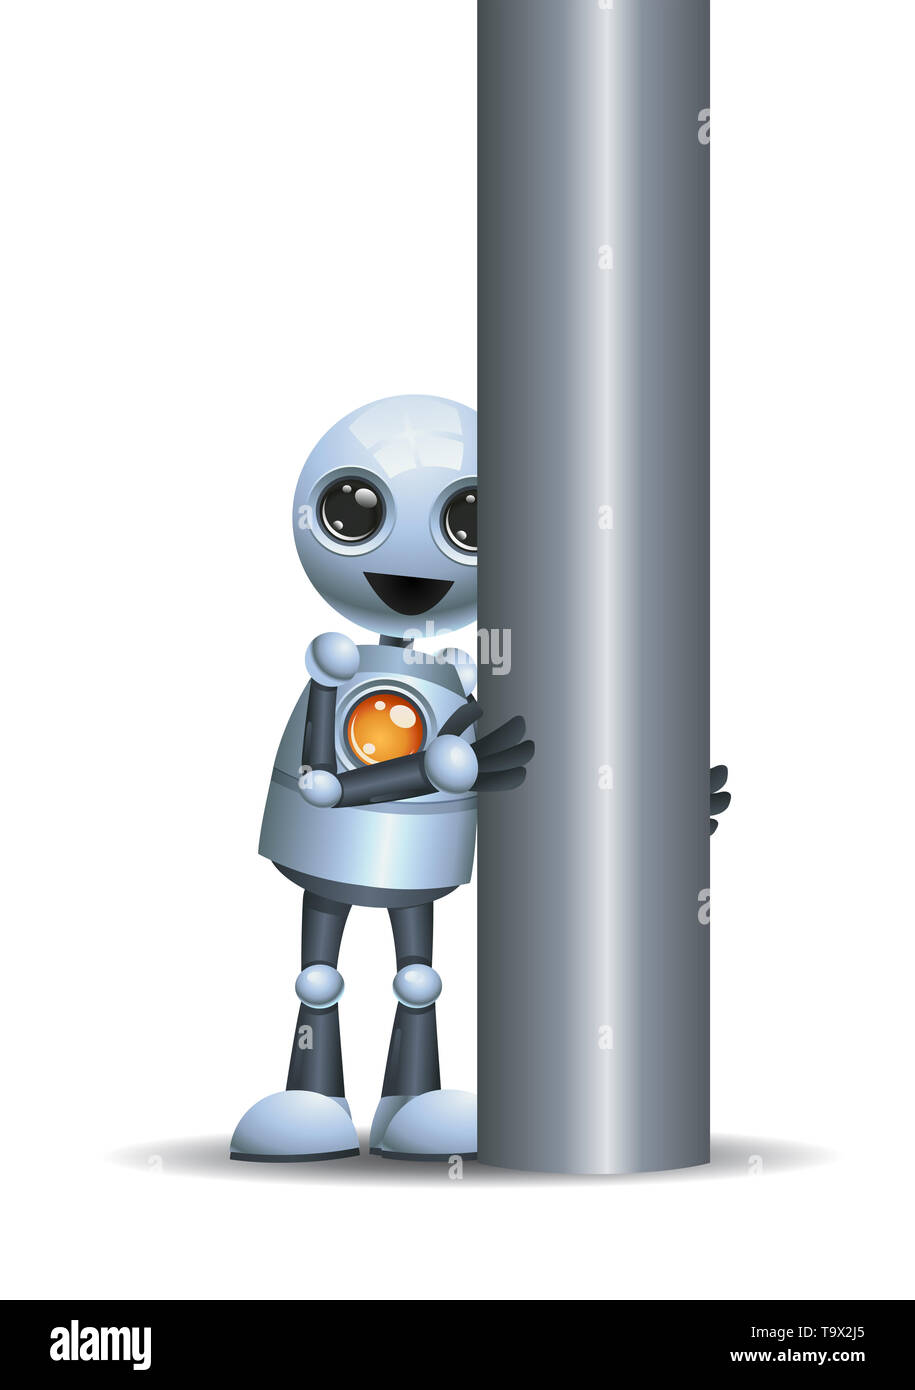 illustration of a little robot hidding behind iron pole on isolated white background Stock Photo